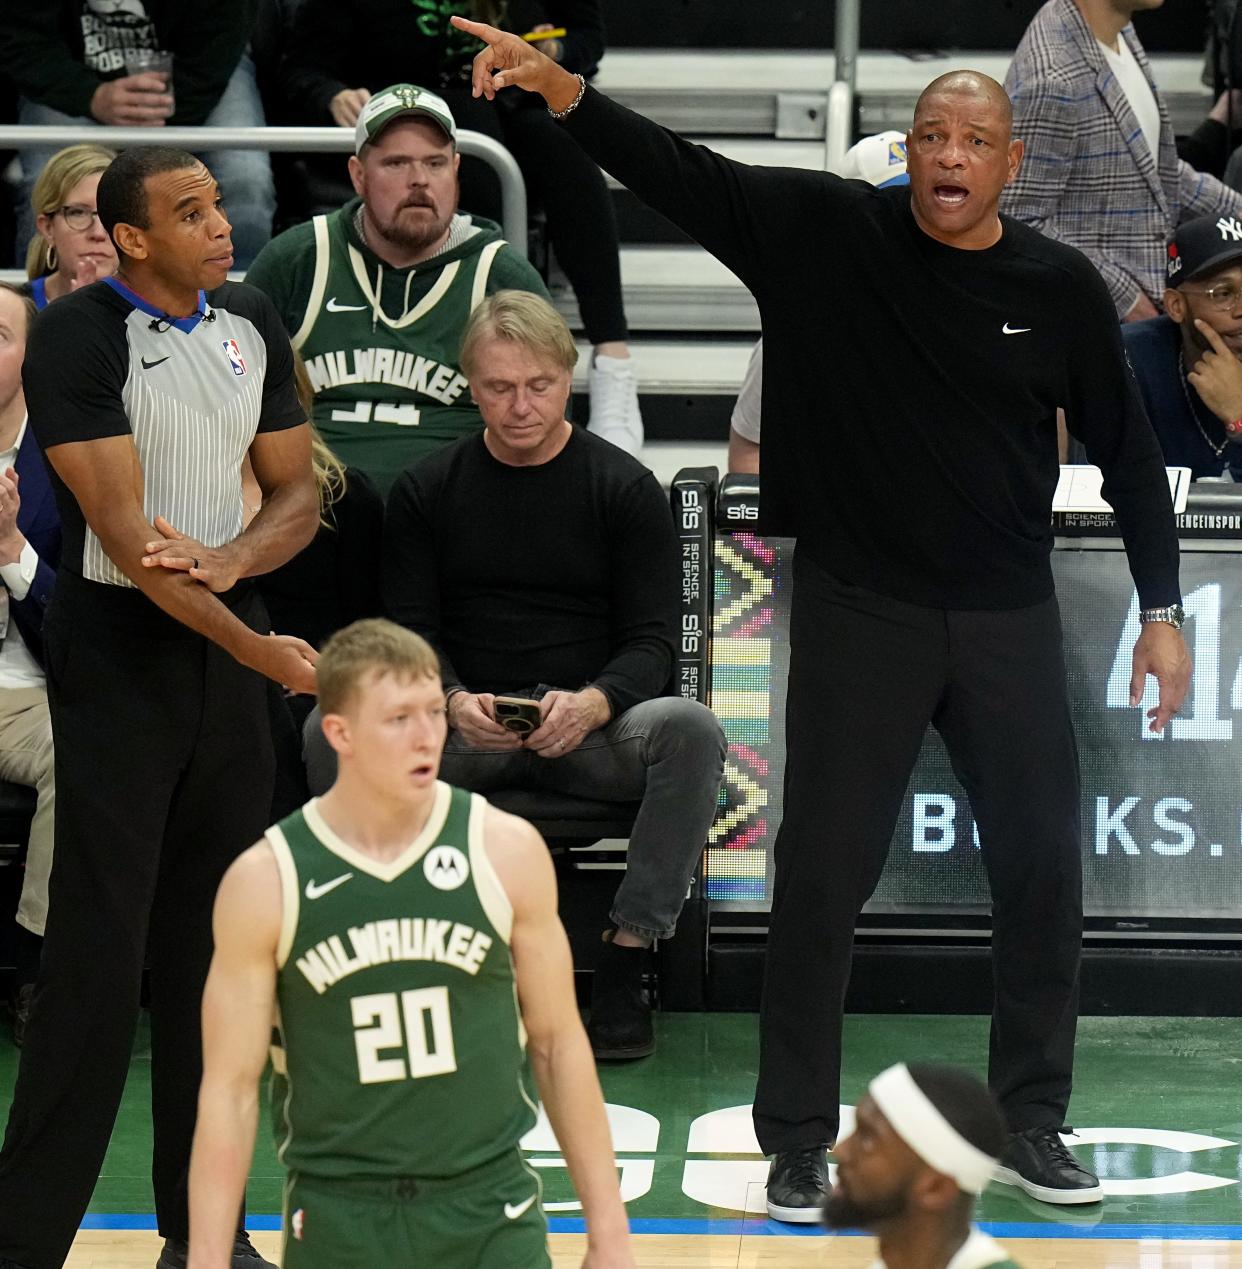 Milwaukee Bucks head coach Doc Rivers directs his team as owner Wes Edens checks his phone during a game against the Minnesota Timberwolves on Feb. 8 at Fiserv Forum.